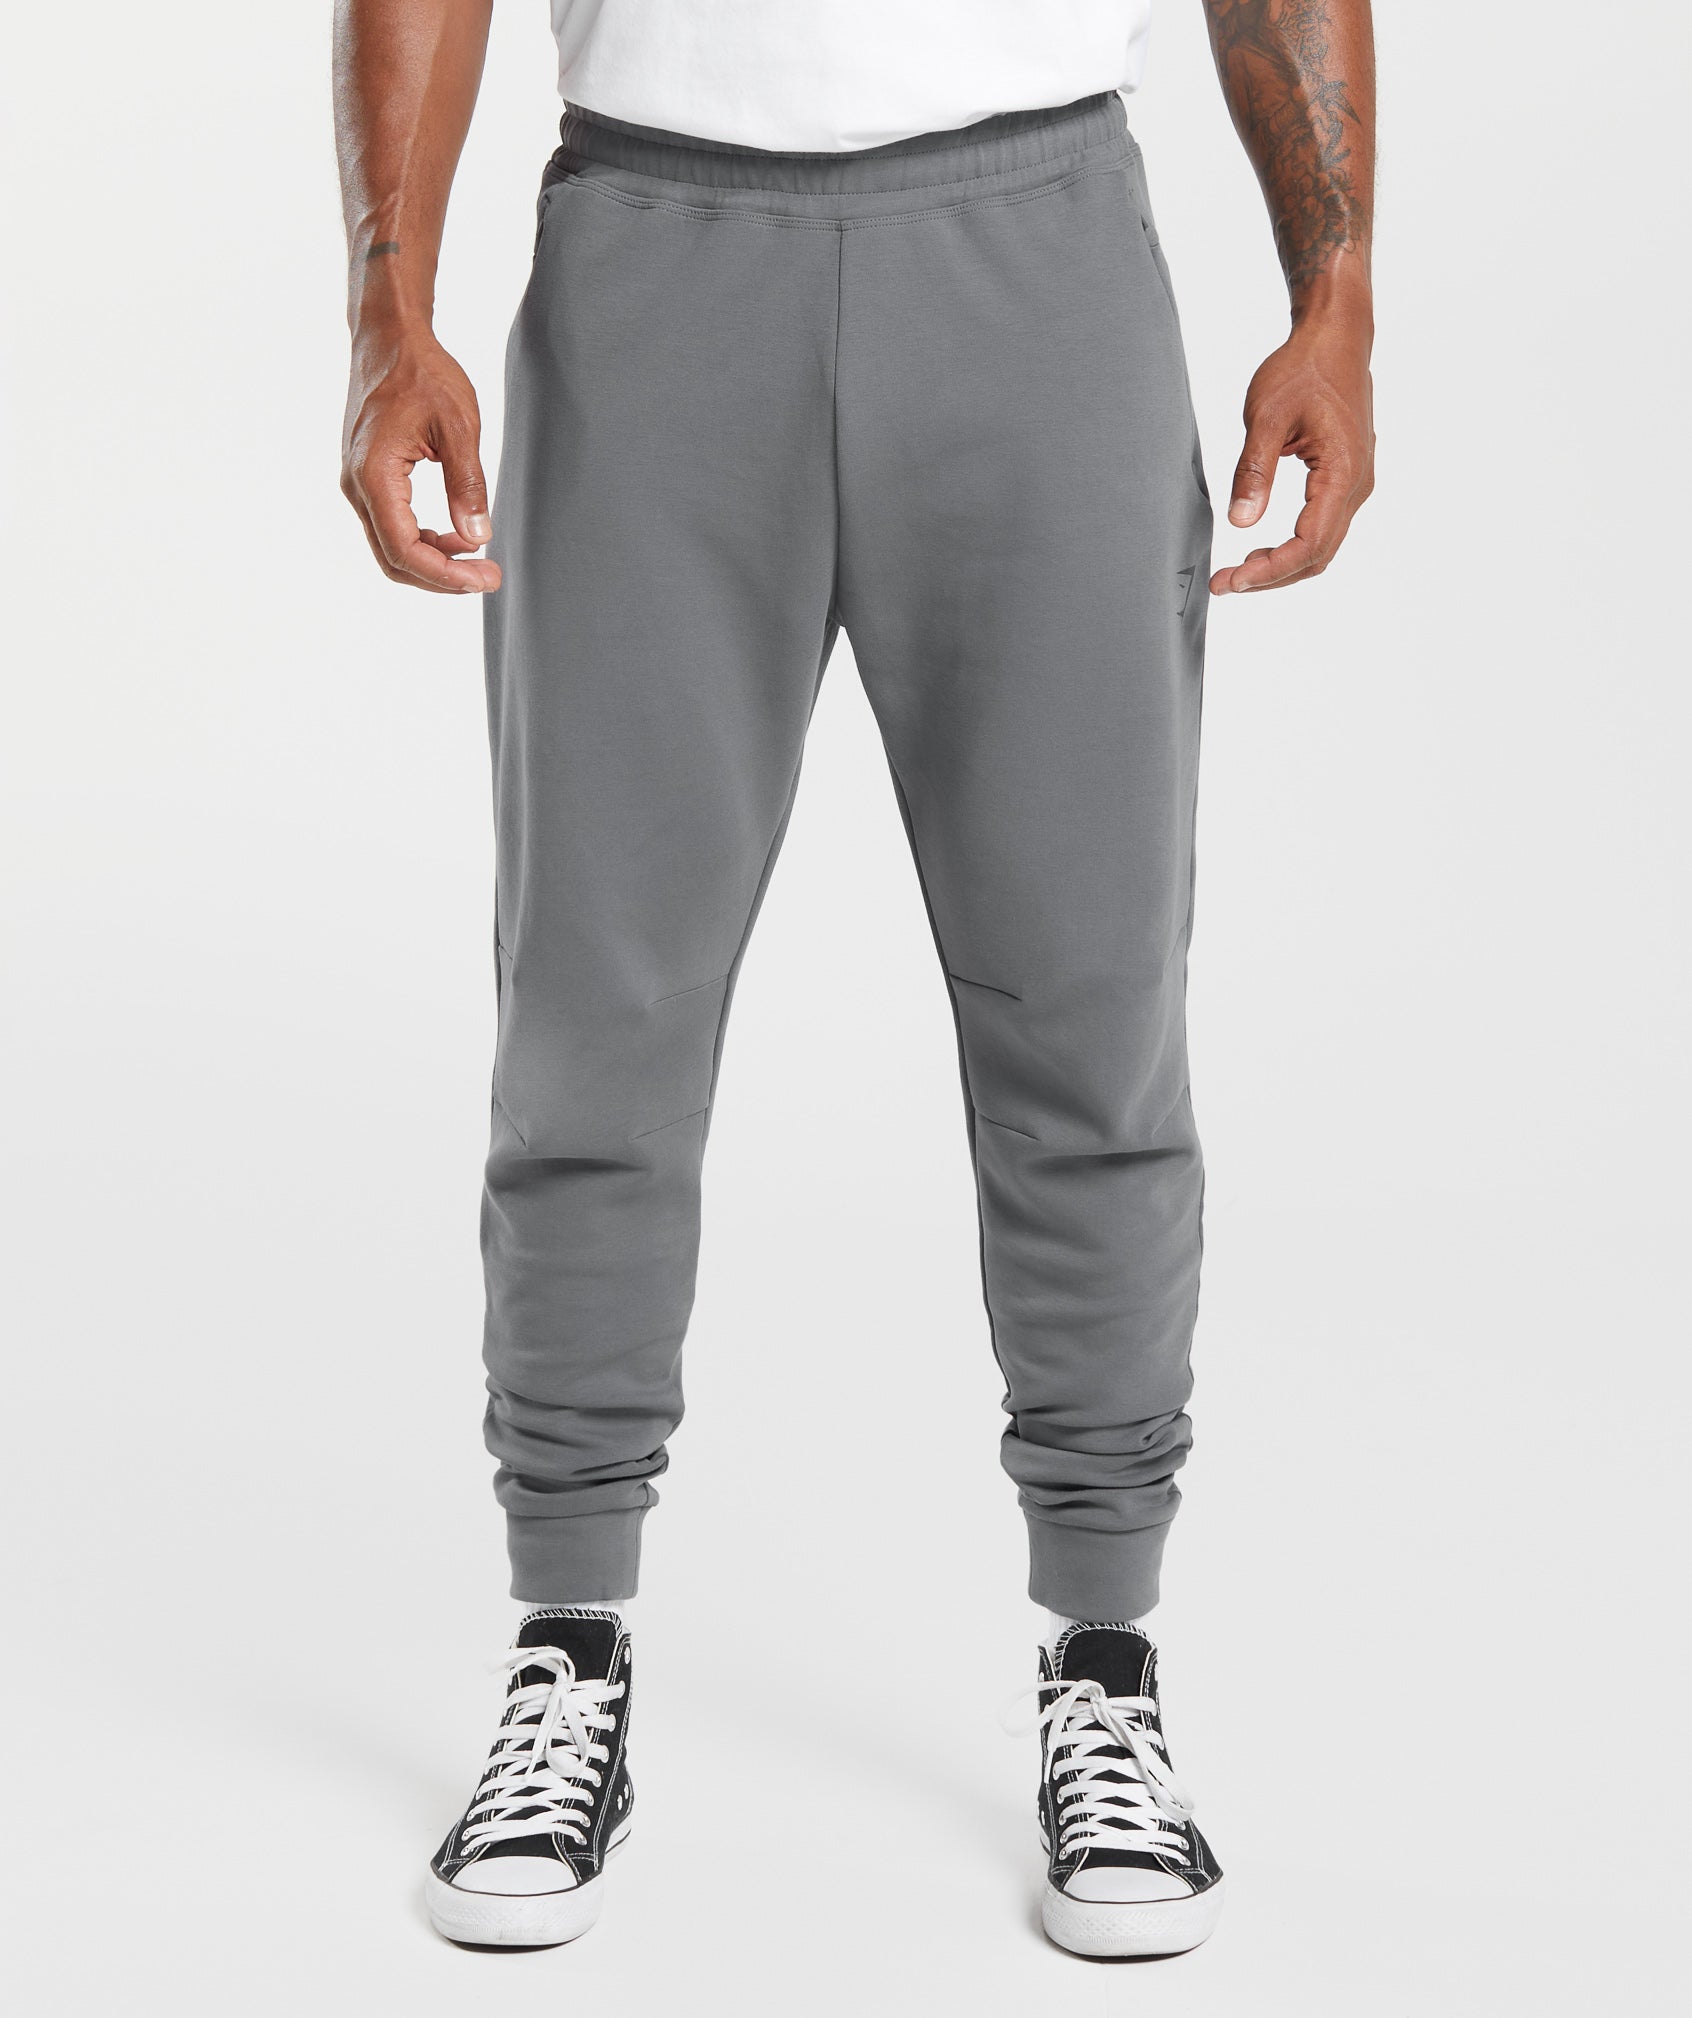 Gymshark Rest Day Knit Joggers - Pitch Grey